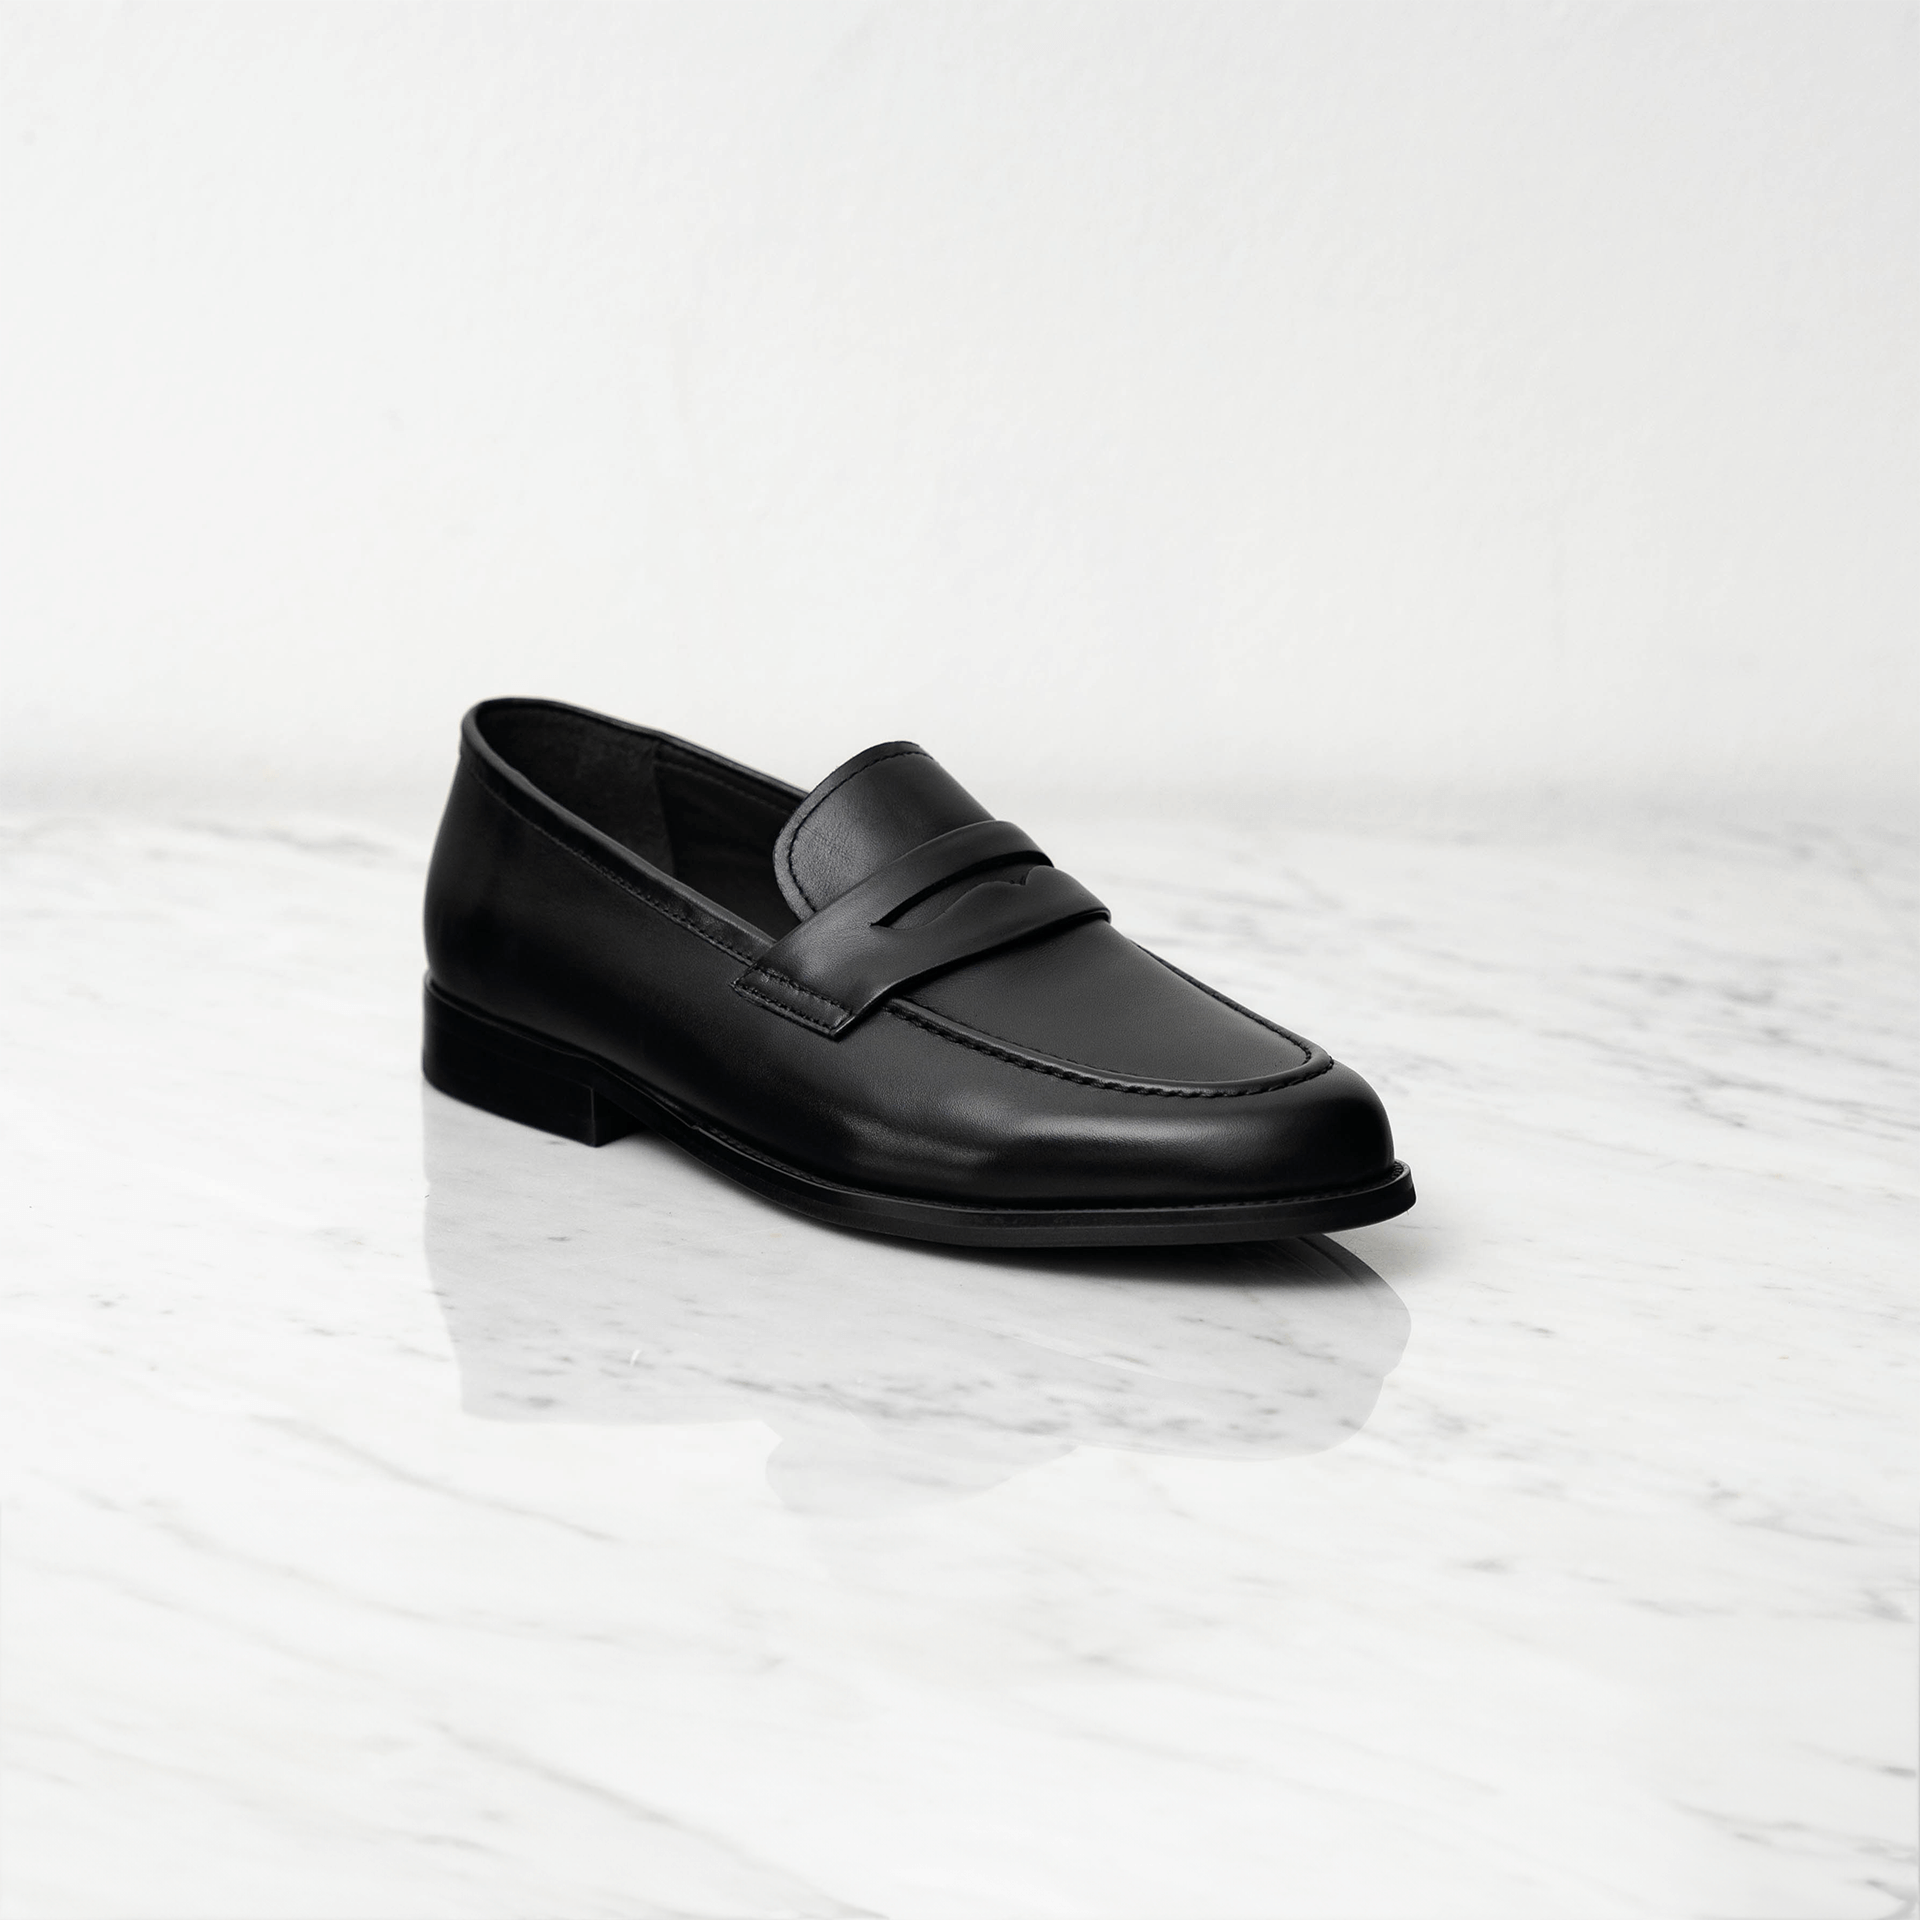 classic penny loafer